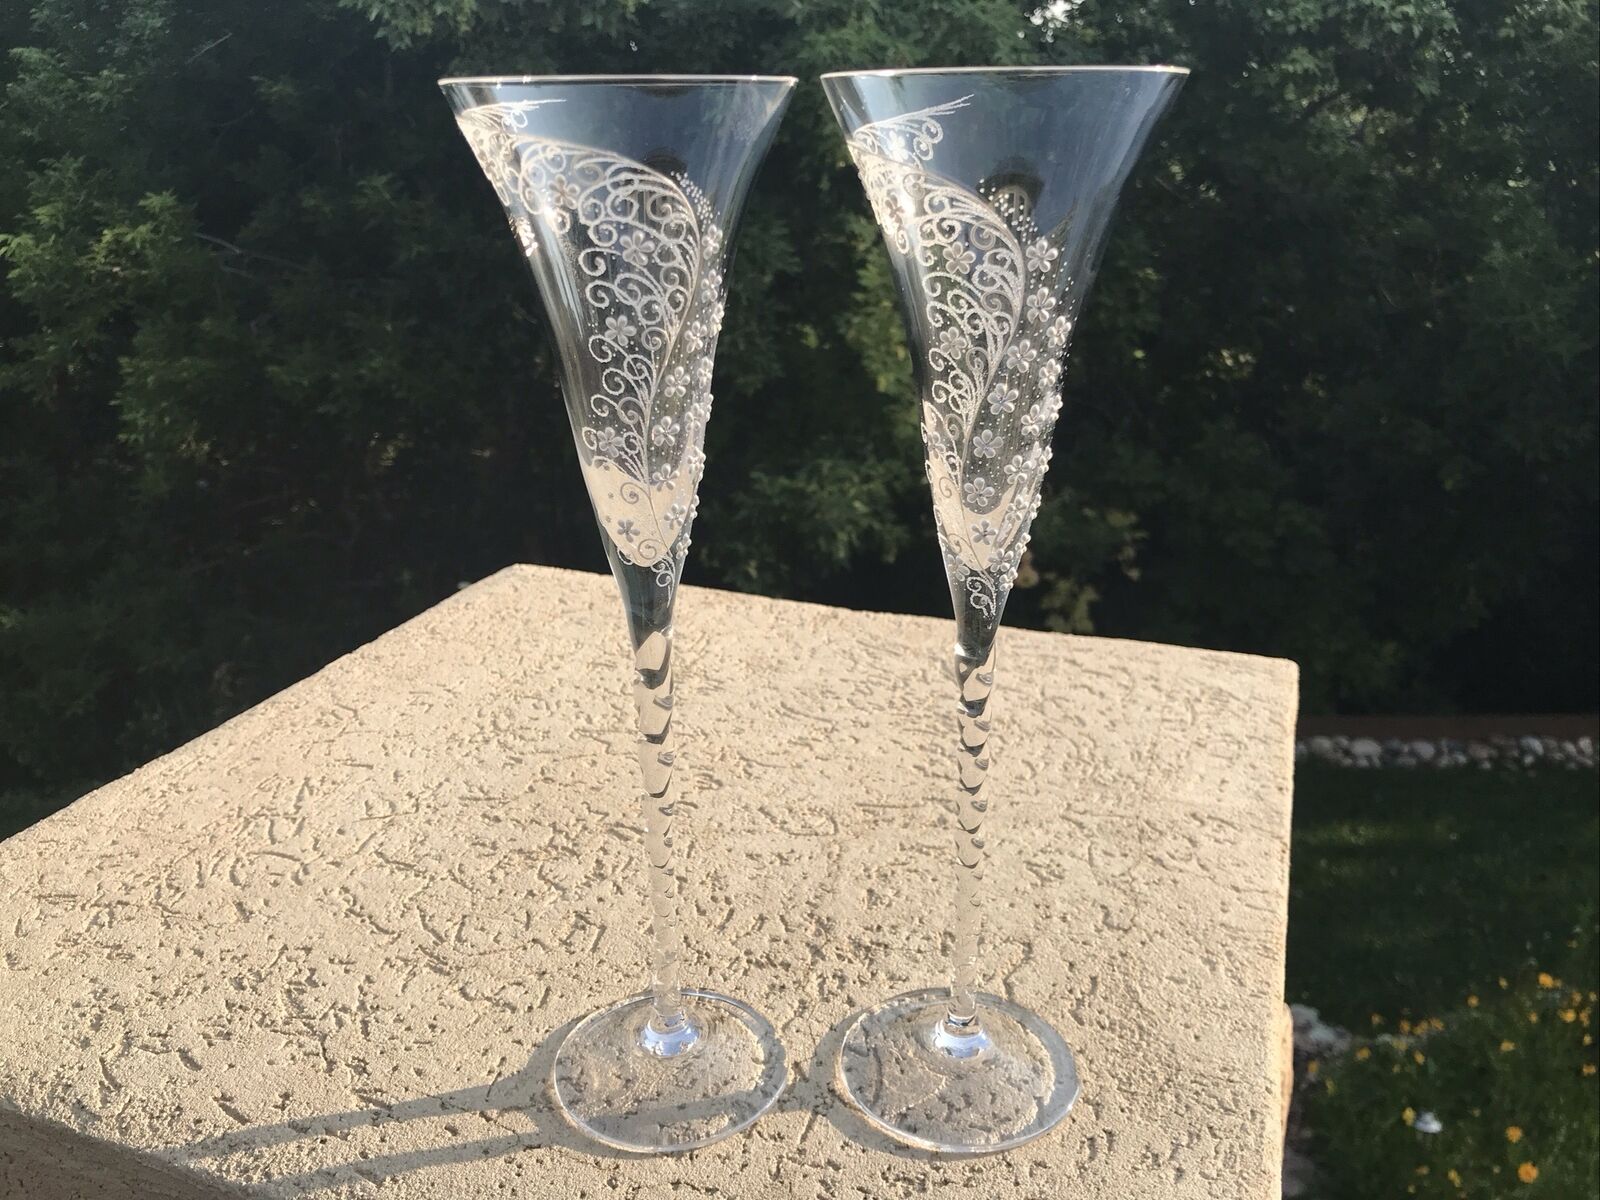 Champagne Flutes Set Of 2 Toasting Glasses Tall Elegant Floral With Twisted Stem